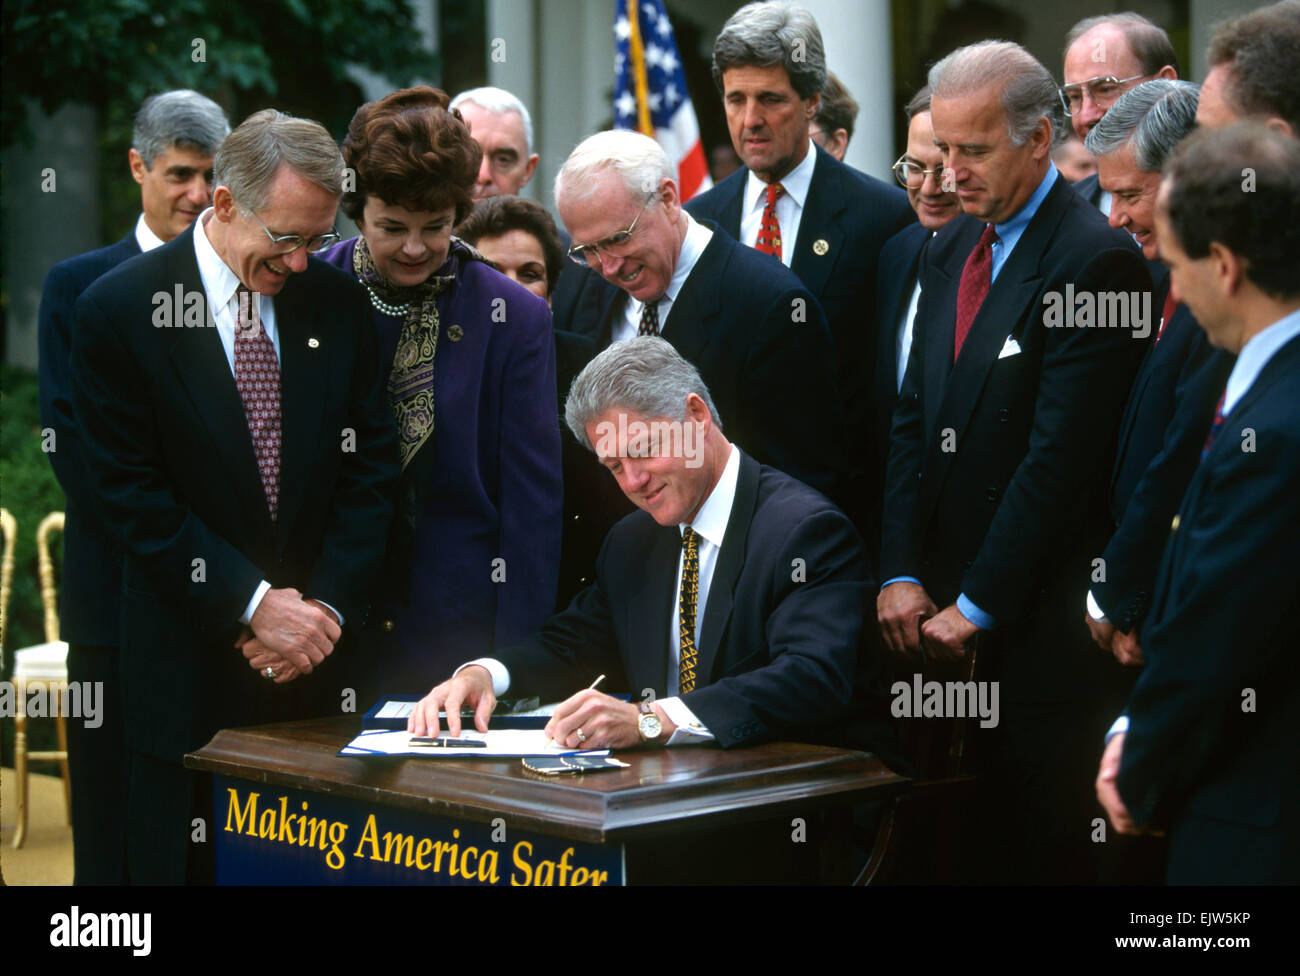 US President Bill Clinton signs into law the Crime bill during a ceremony on the South Lawn of the White House October 3, 1996 in Washington, DC.  Senators Harry Reid, Dianne Feinstein, John Kerry and Joe Biden look on. Stock Photo